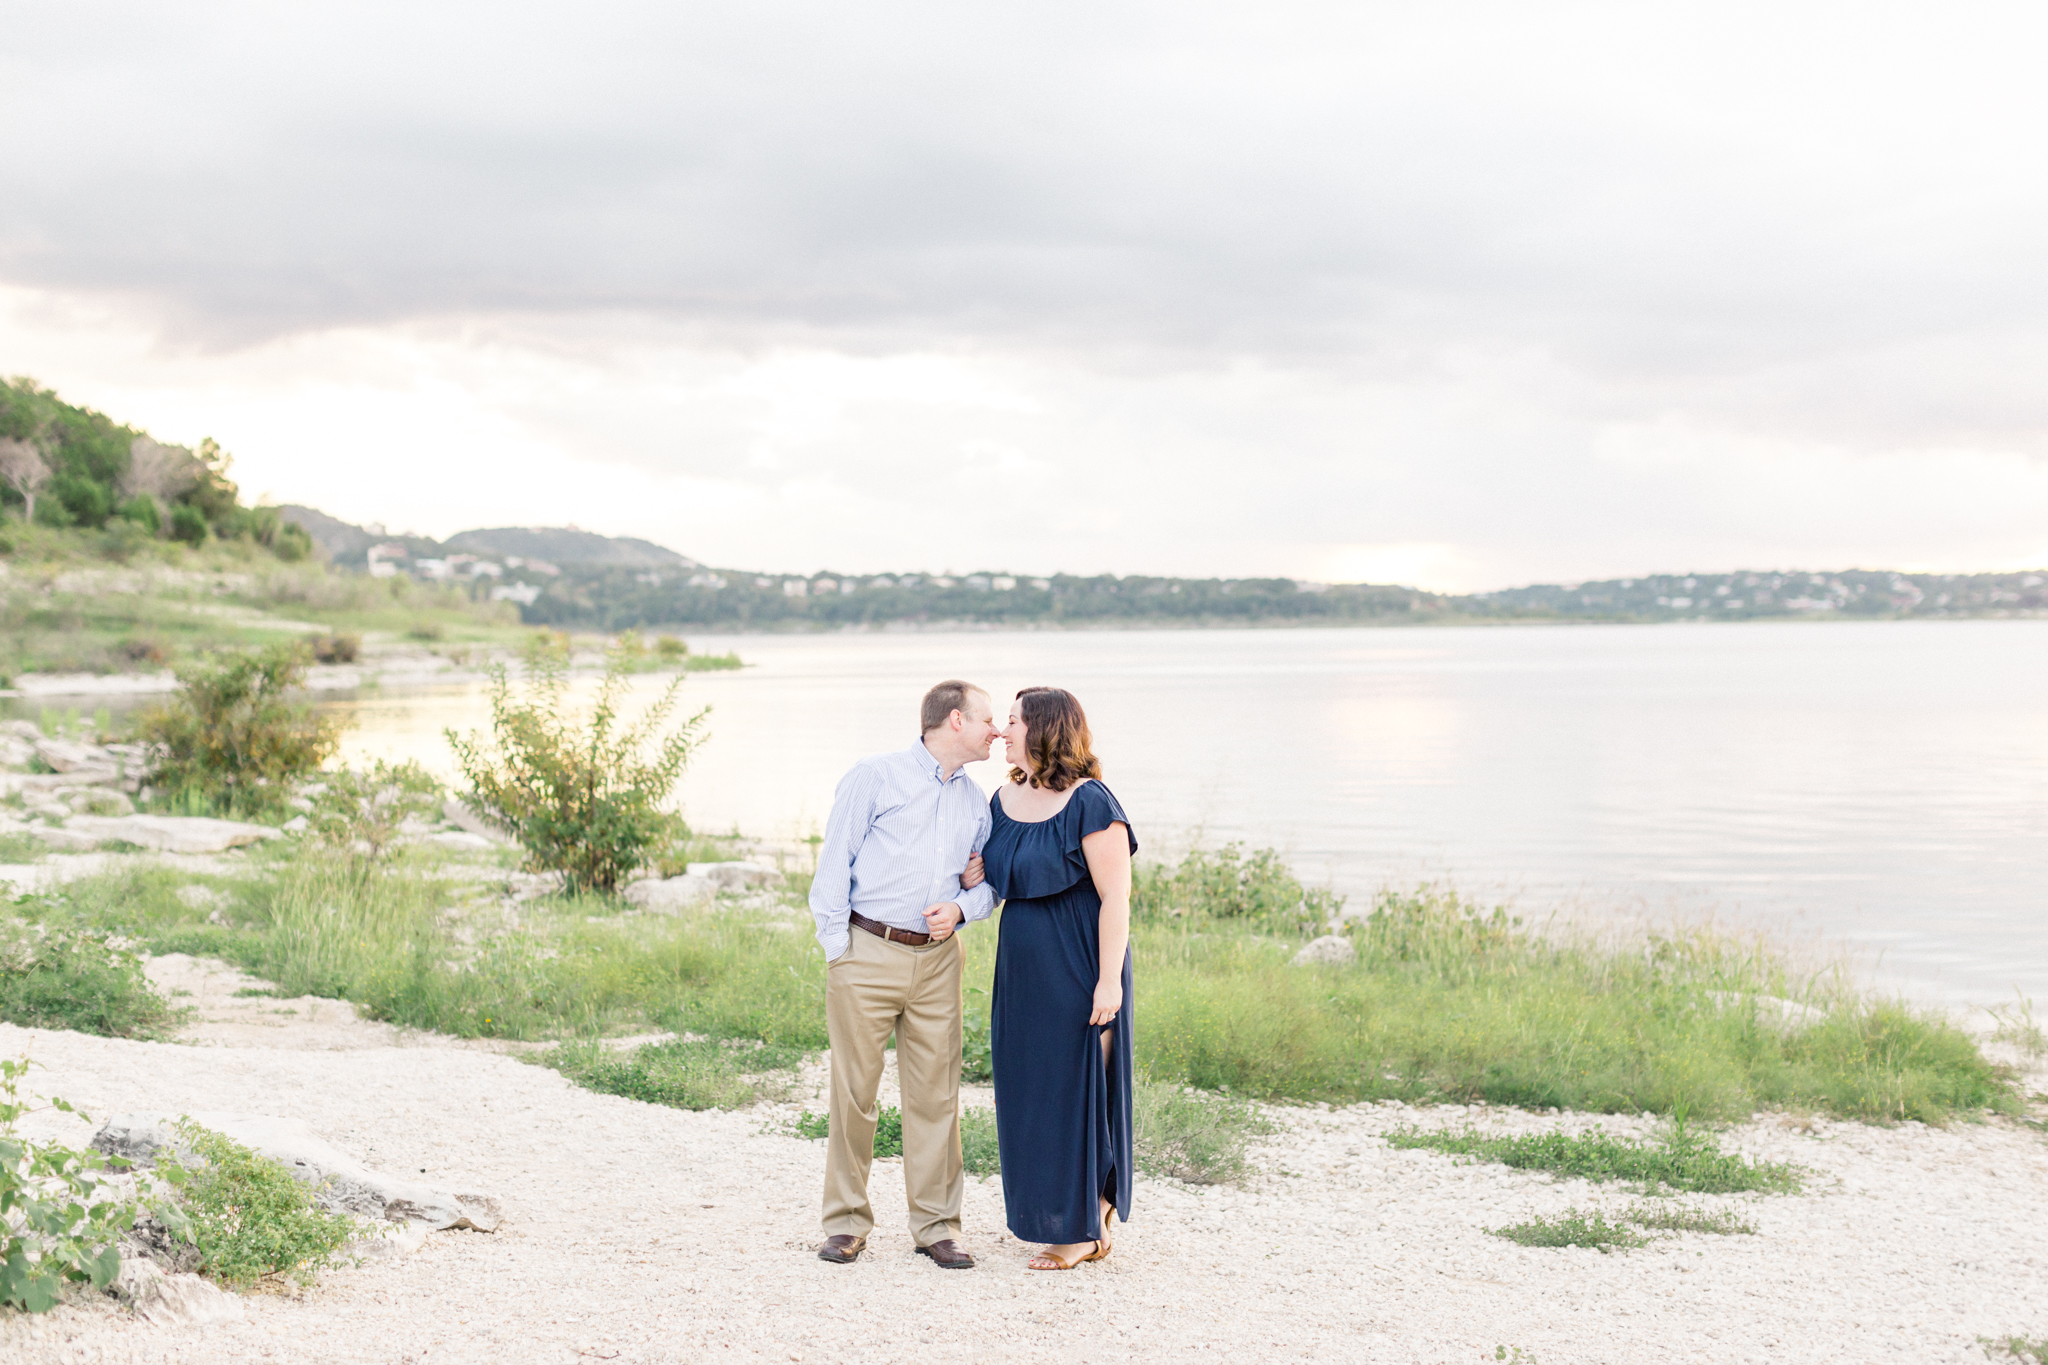 San Antonio Austin Tx Texas Hill Country Canyon Lake Overlook Park Session Wedding Engagement Anniversary Photographer Engagement Anniversary Photo Session Pictures